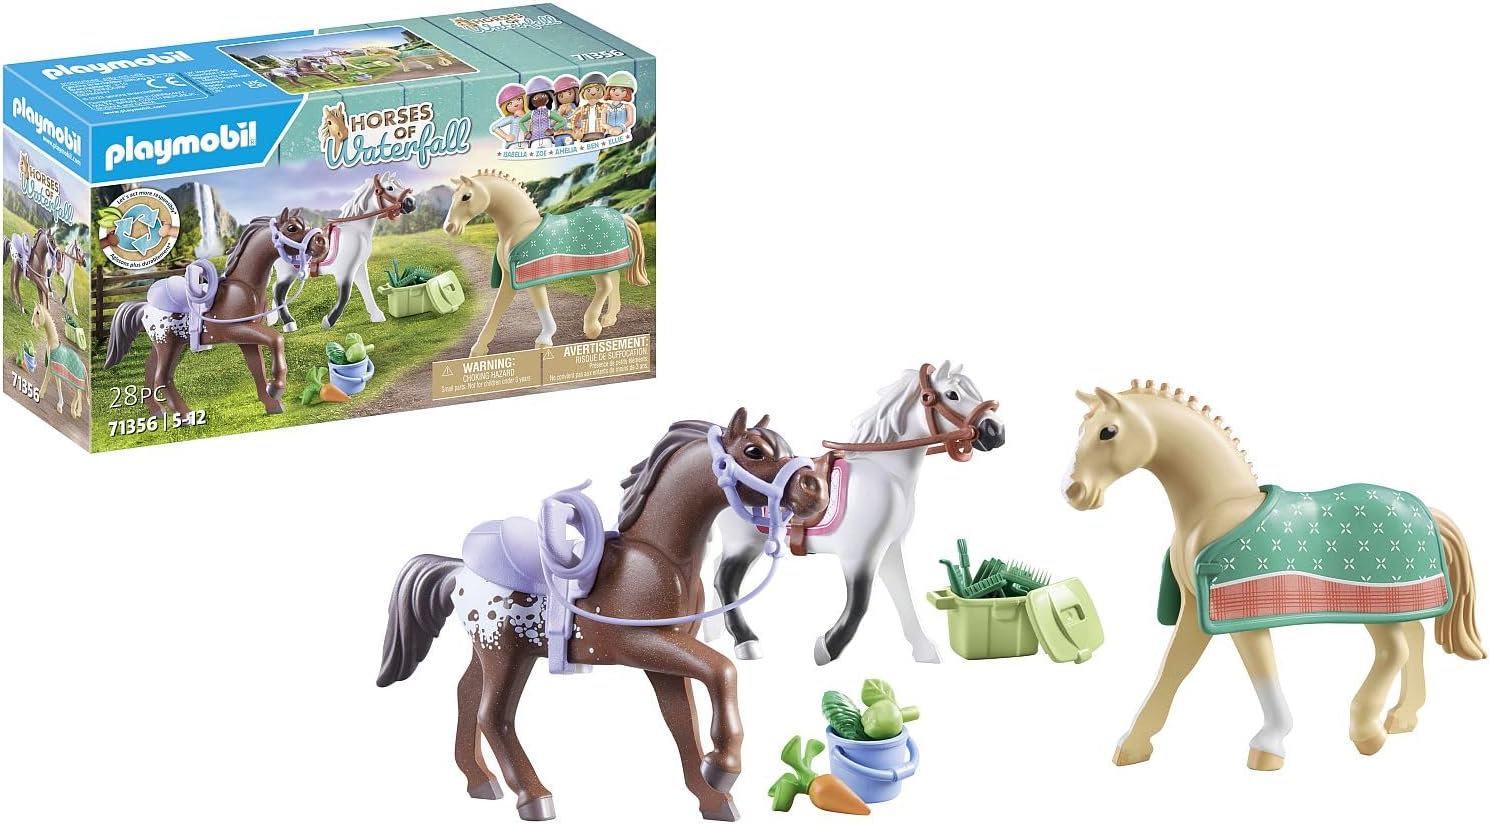 PLAYMOBIL Horses of Waterfall 71356 3 Horses: Morgan, Quarter Horse & Shagya Arabian, Animal Trio for Exciting Riding Adventures, Sustainable Toy for Children from 5 Years